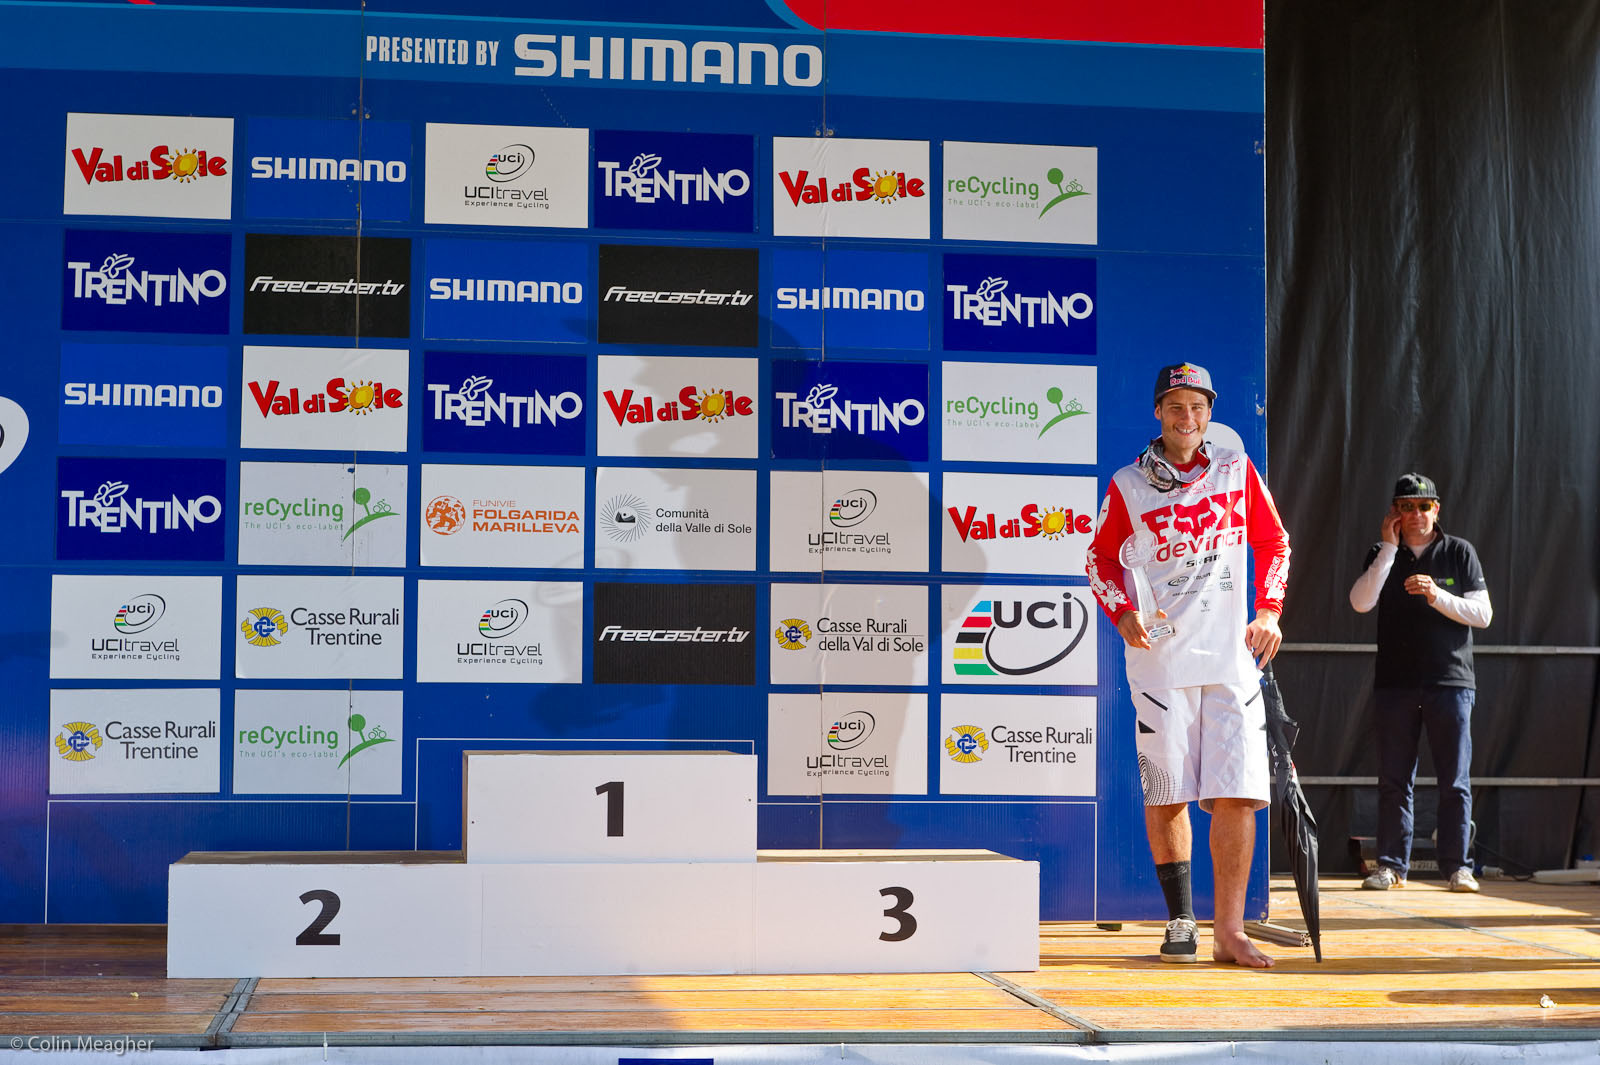 Steve on the podium for the WC overall at the World Cup finals in Val di Sole IT in 2011